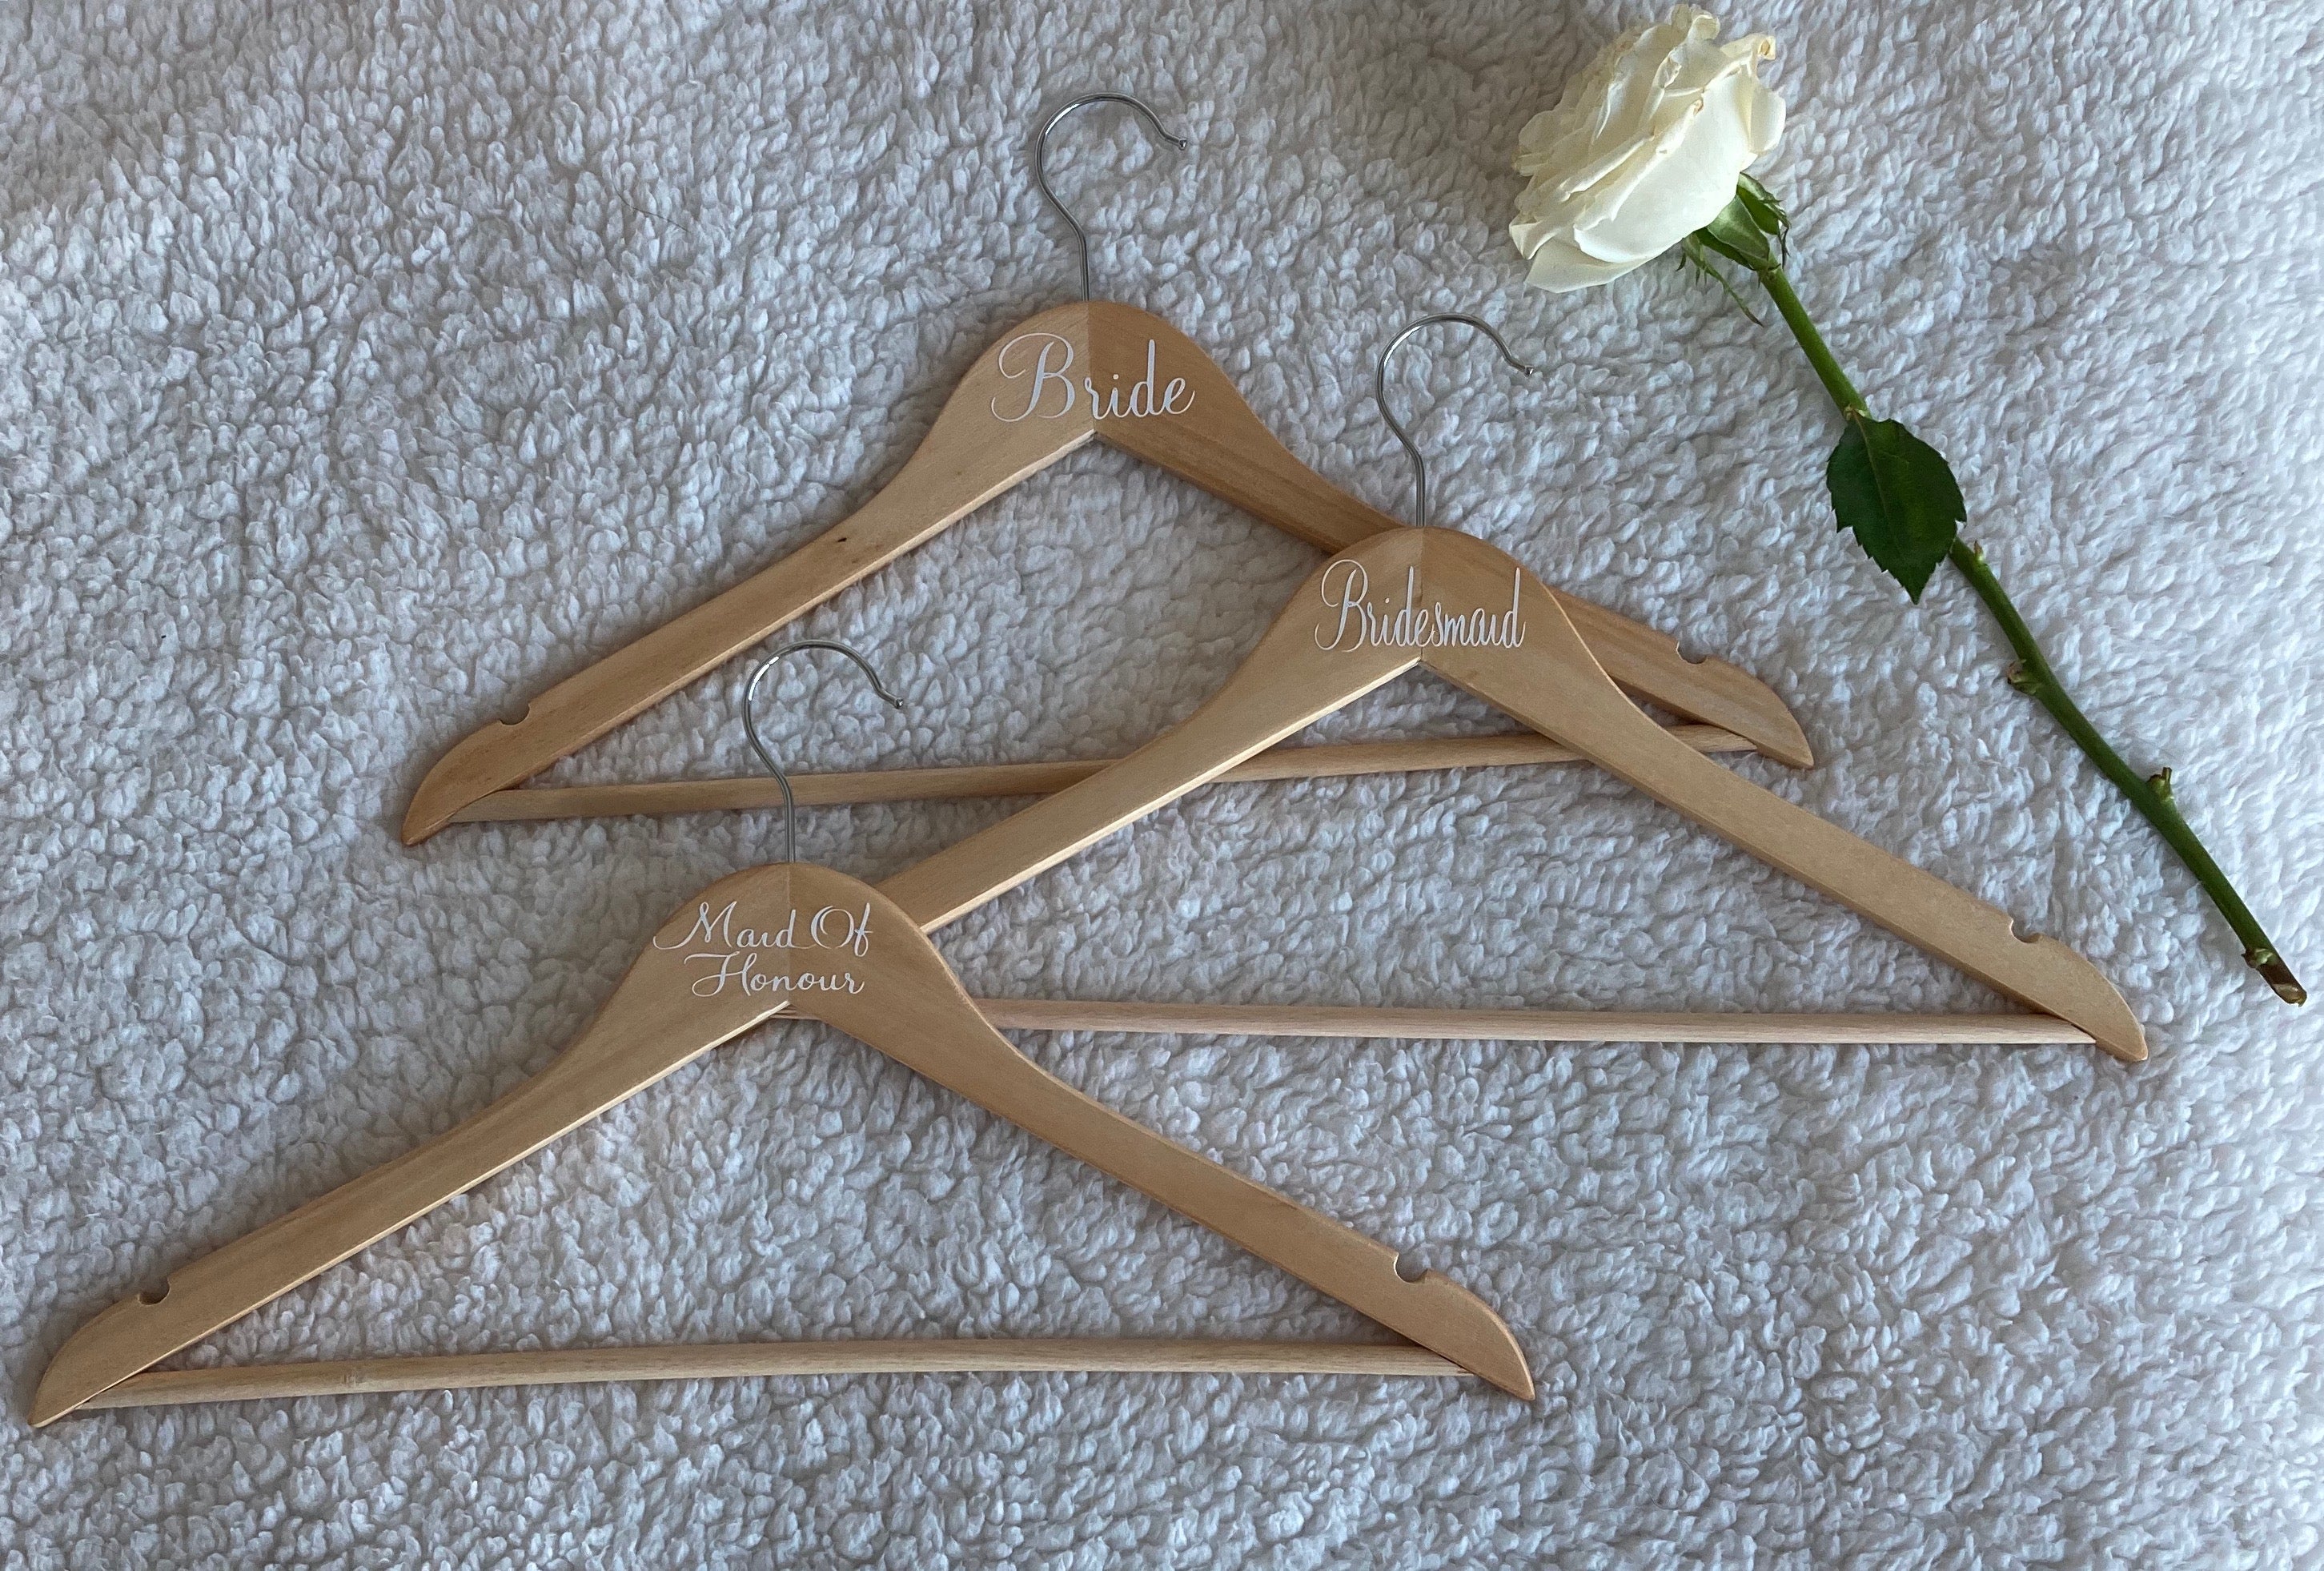 Bridal party wooden hangers